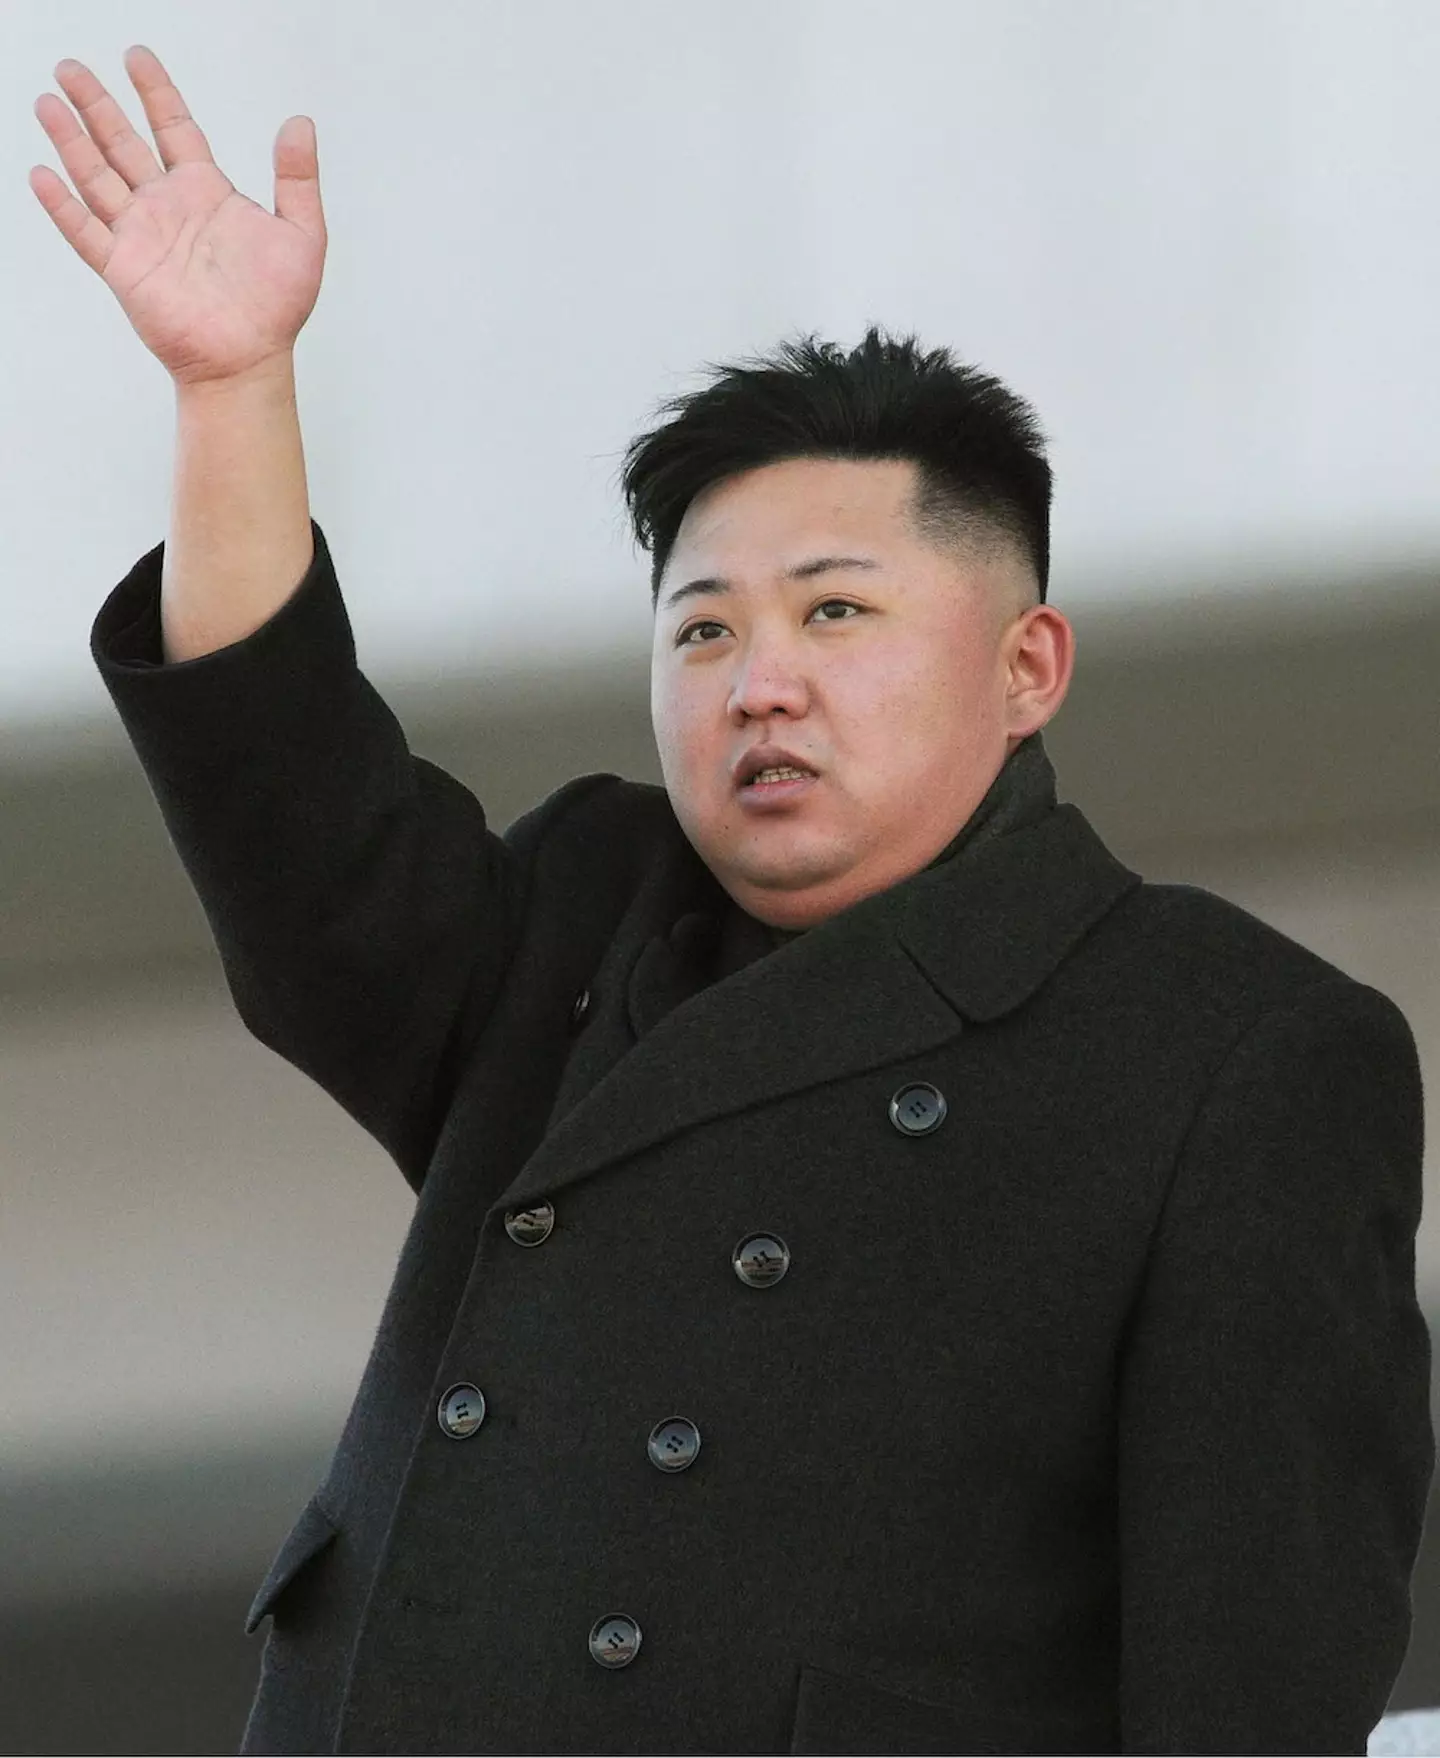 North Korean officials have praised Kim Jong-un for the Covid vaccine.